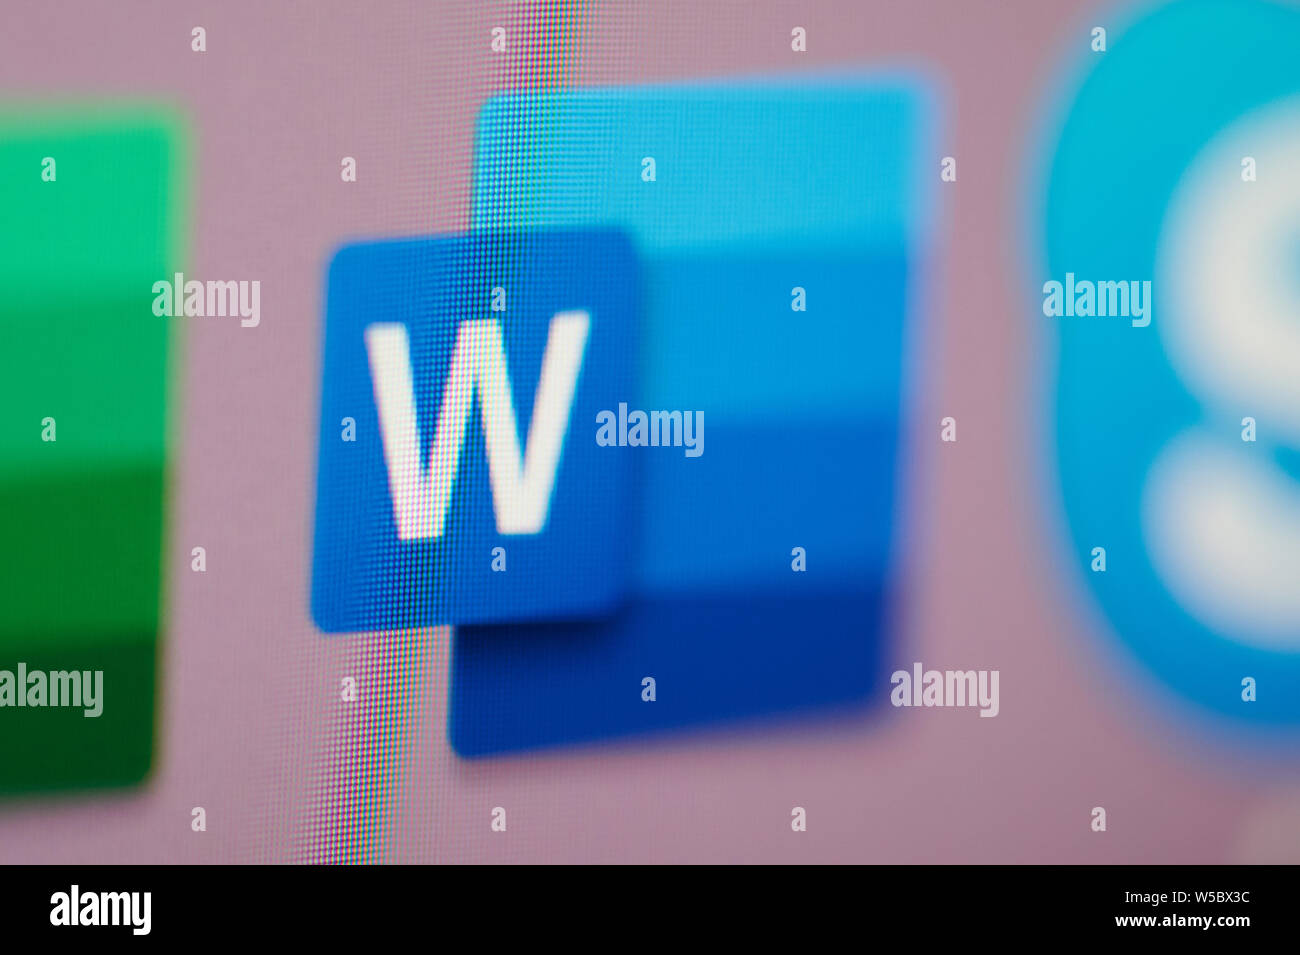 New york, USA - july 26, 2019: Starting microsoft office word on computer macro close up view in pixel screen Stock Photo